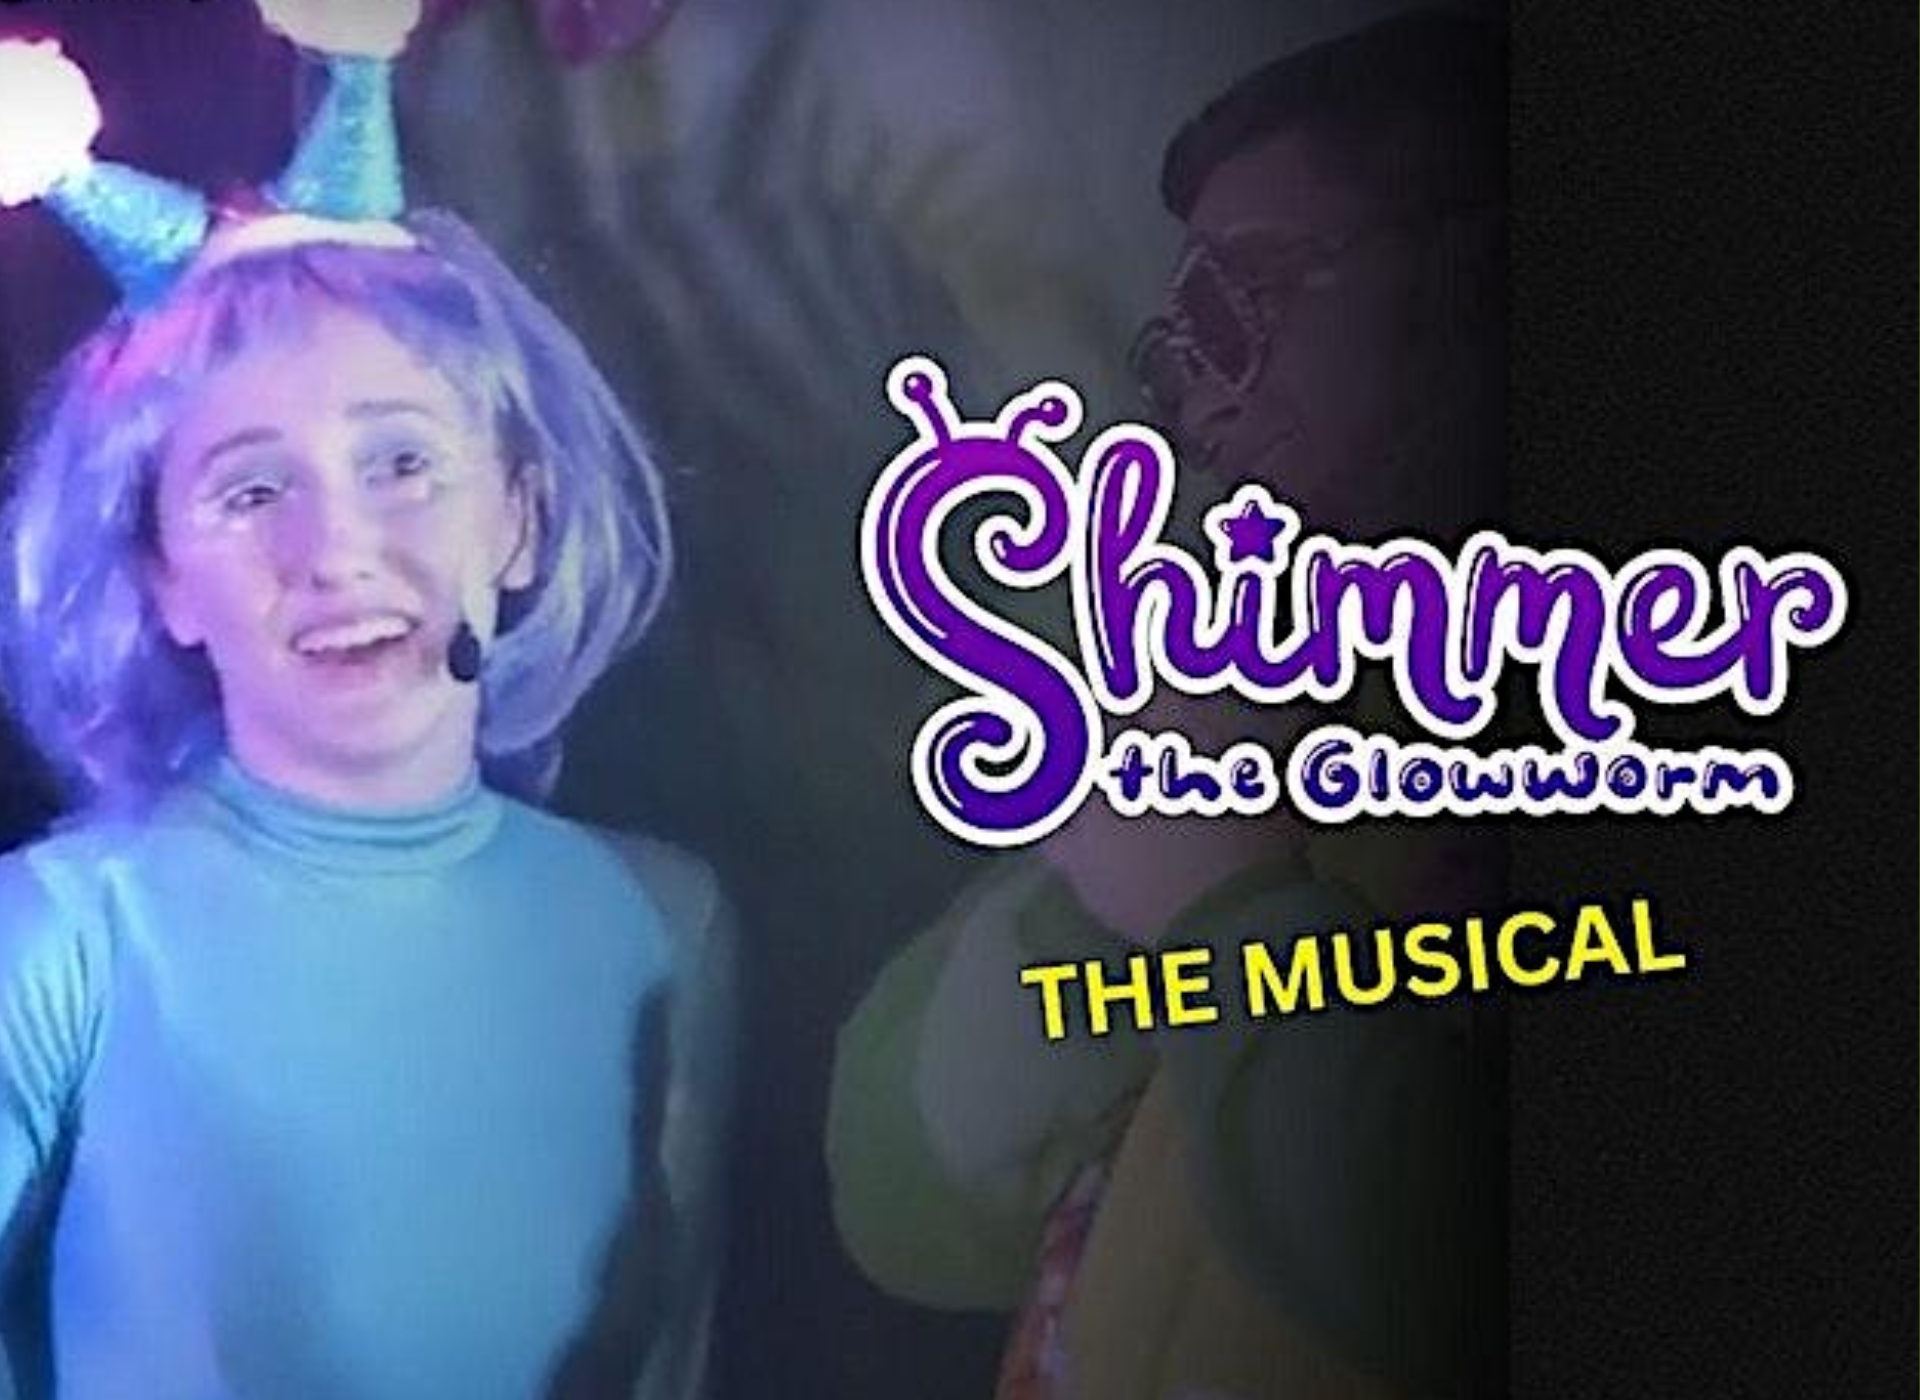 Shimmer The Glowworm - The Musical